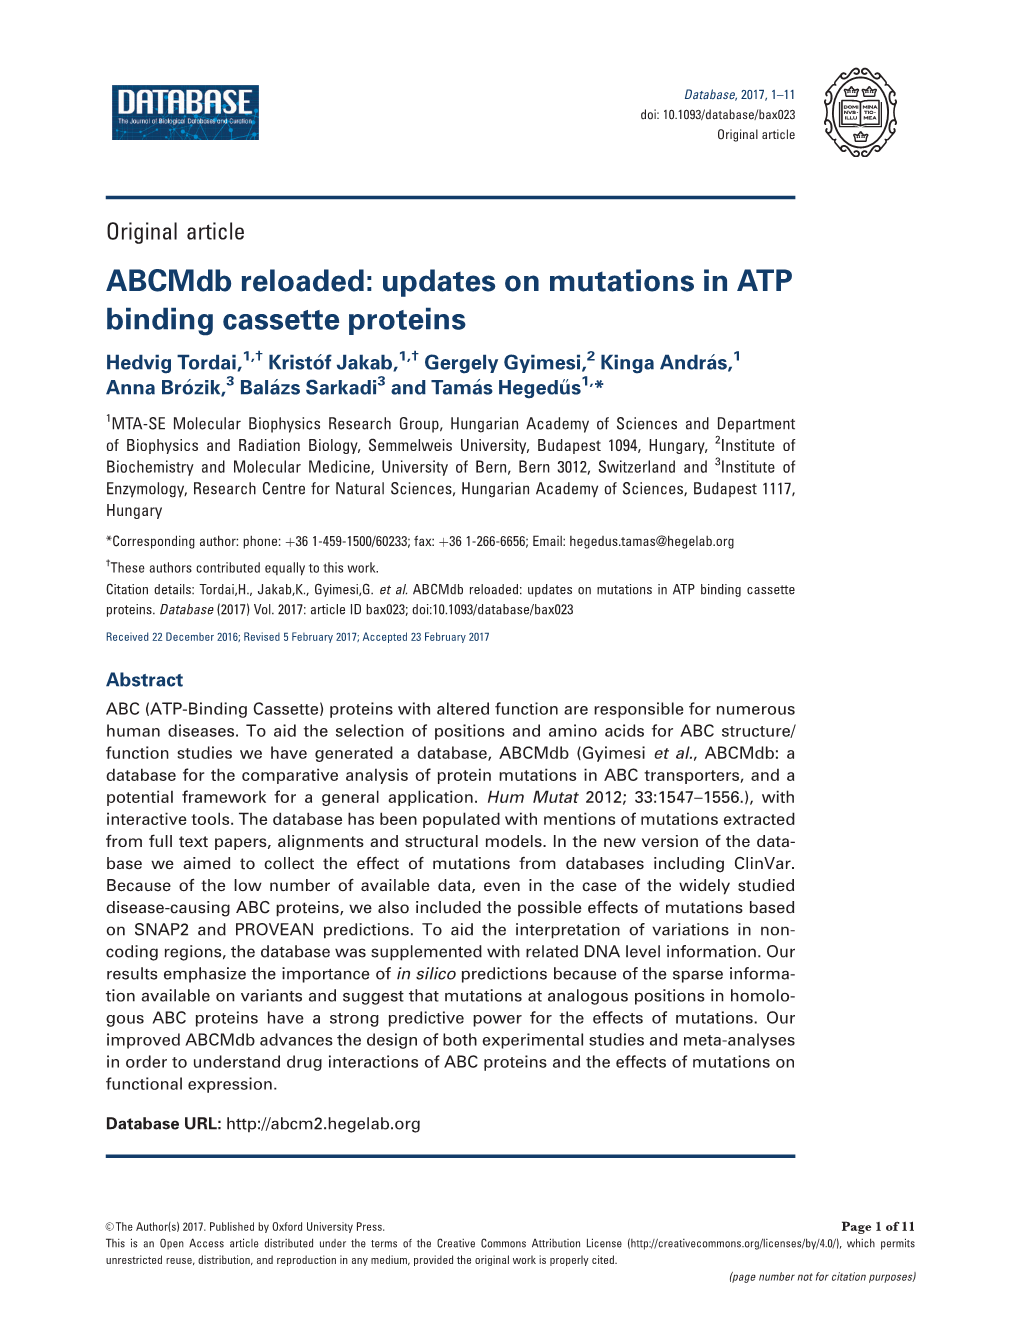 Updates on Mutations in ATP Binding Cassette Proteins